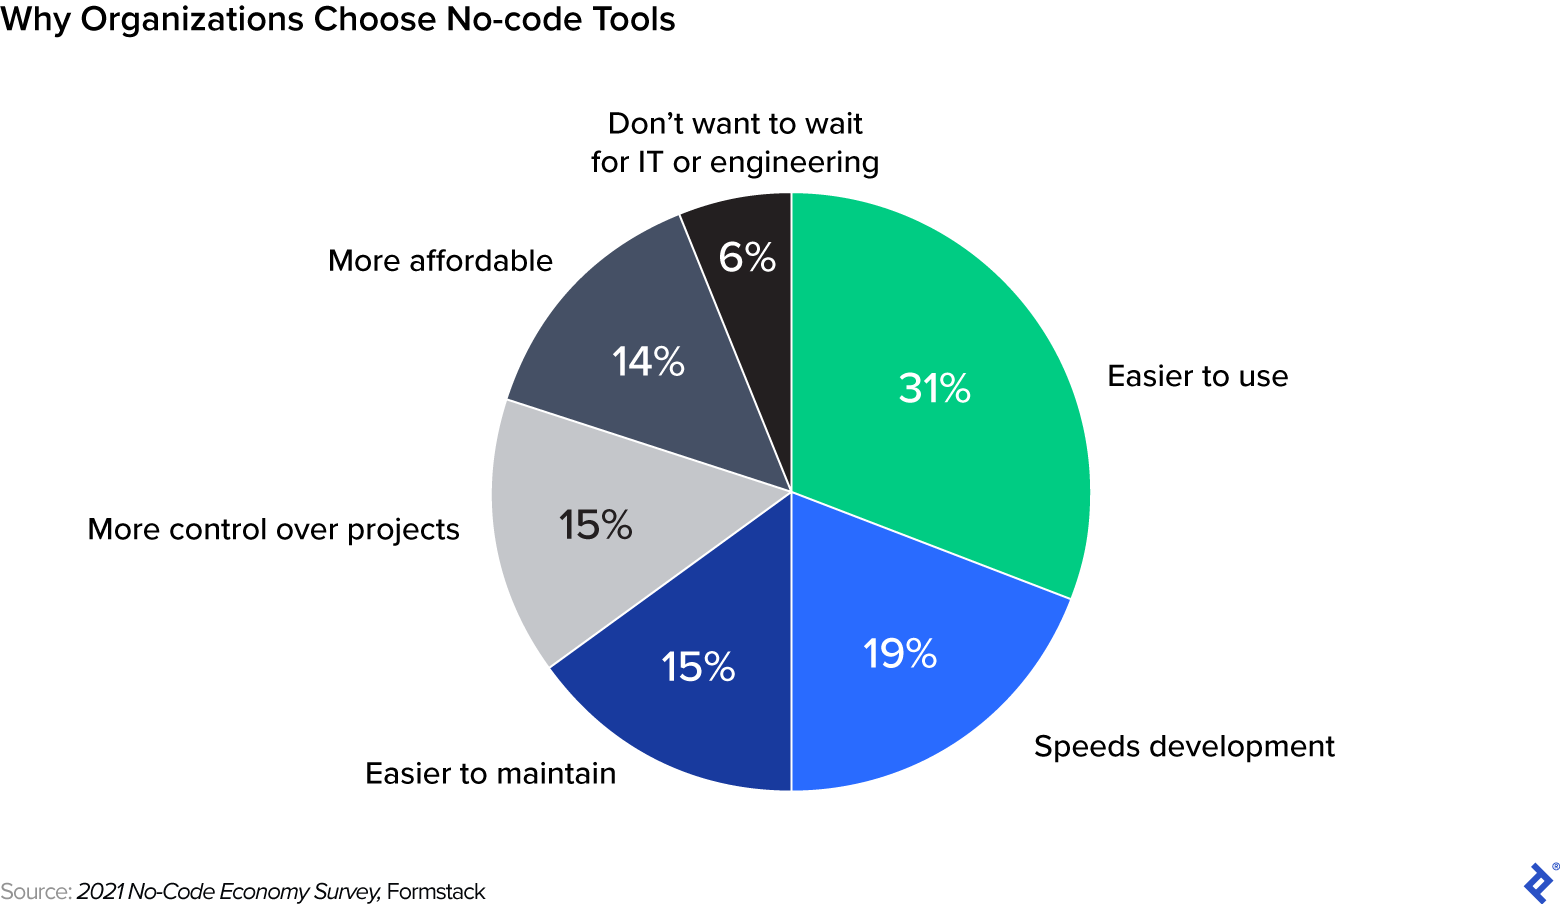 A pie chart shows greater speed and ease are the top reasons organizations choose to use no-code development tools.